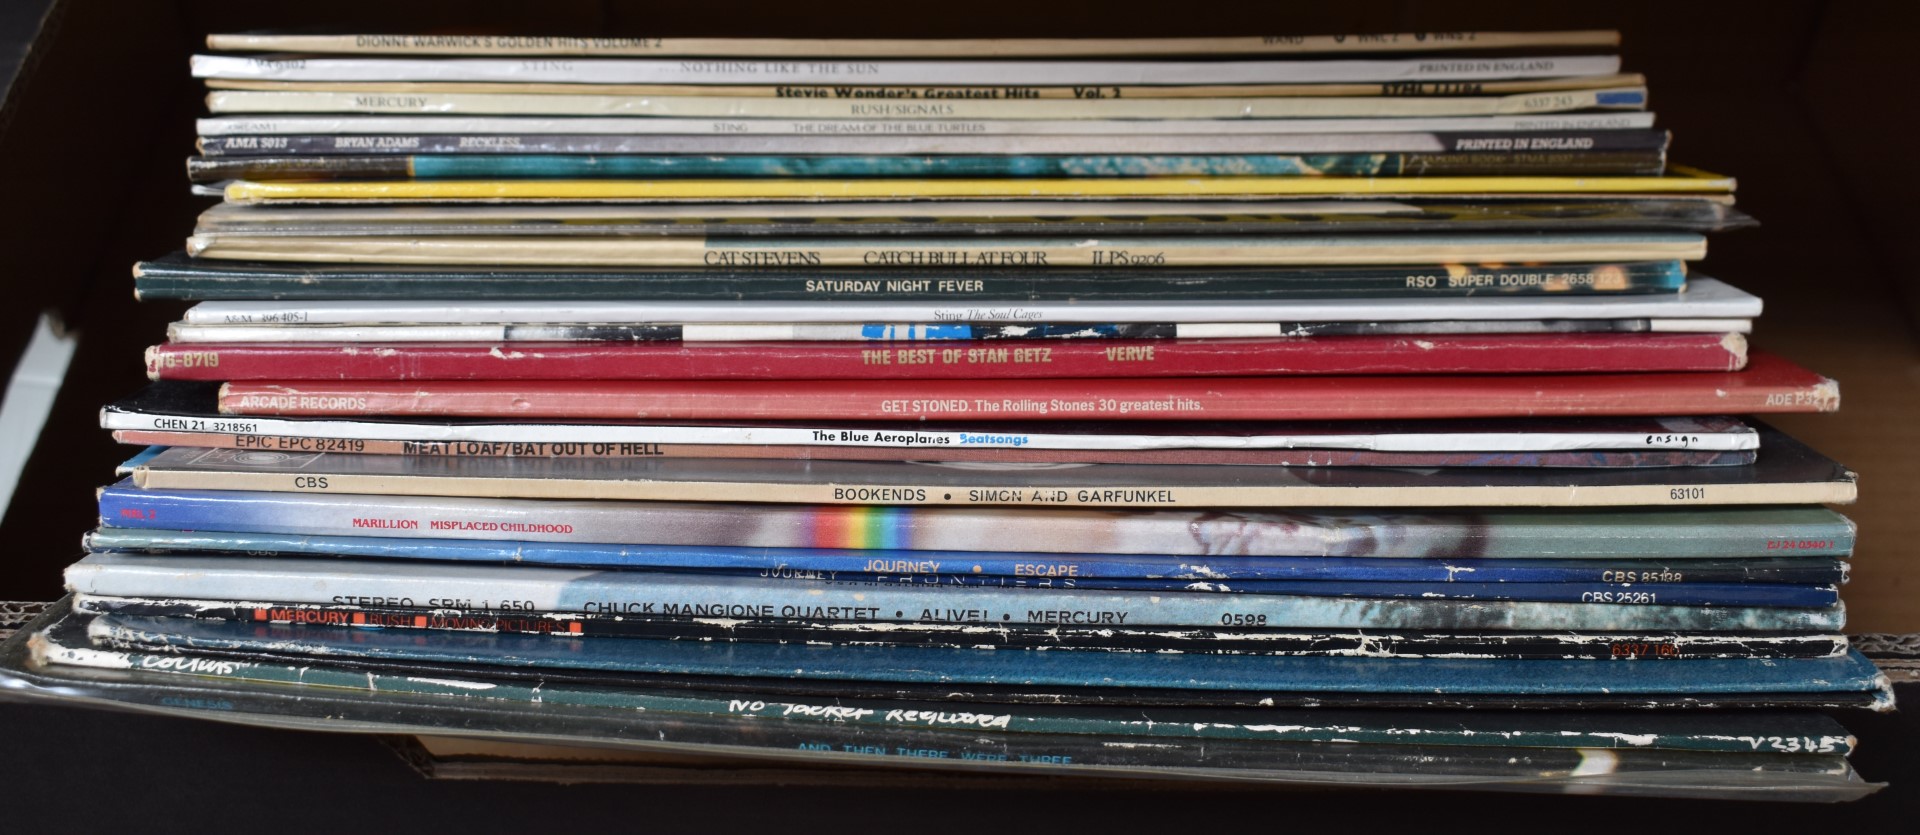 Approximately 30 albums including The Blue Aeroplanes, Genesis, Sting, Chuck Mangione, Journey etc - Image 3 of 3